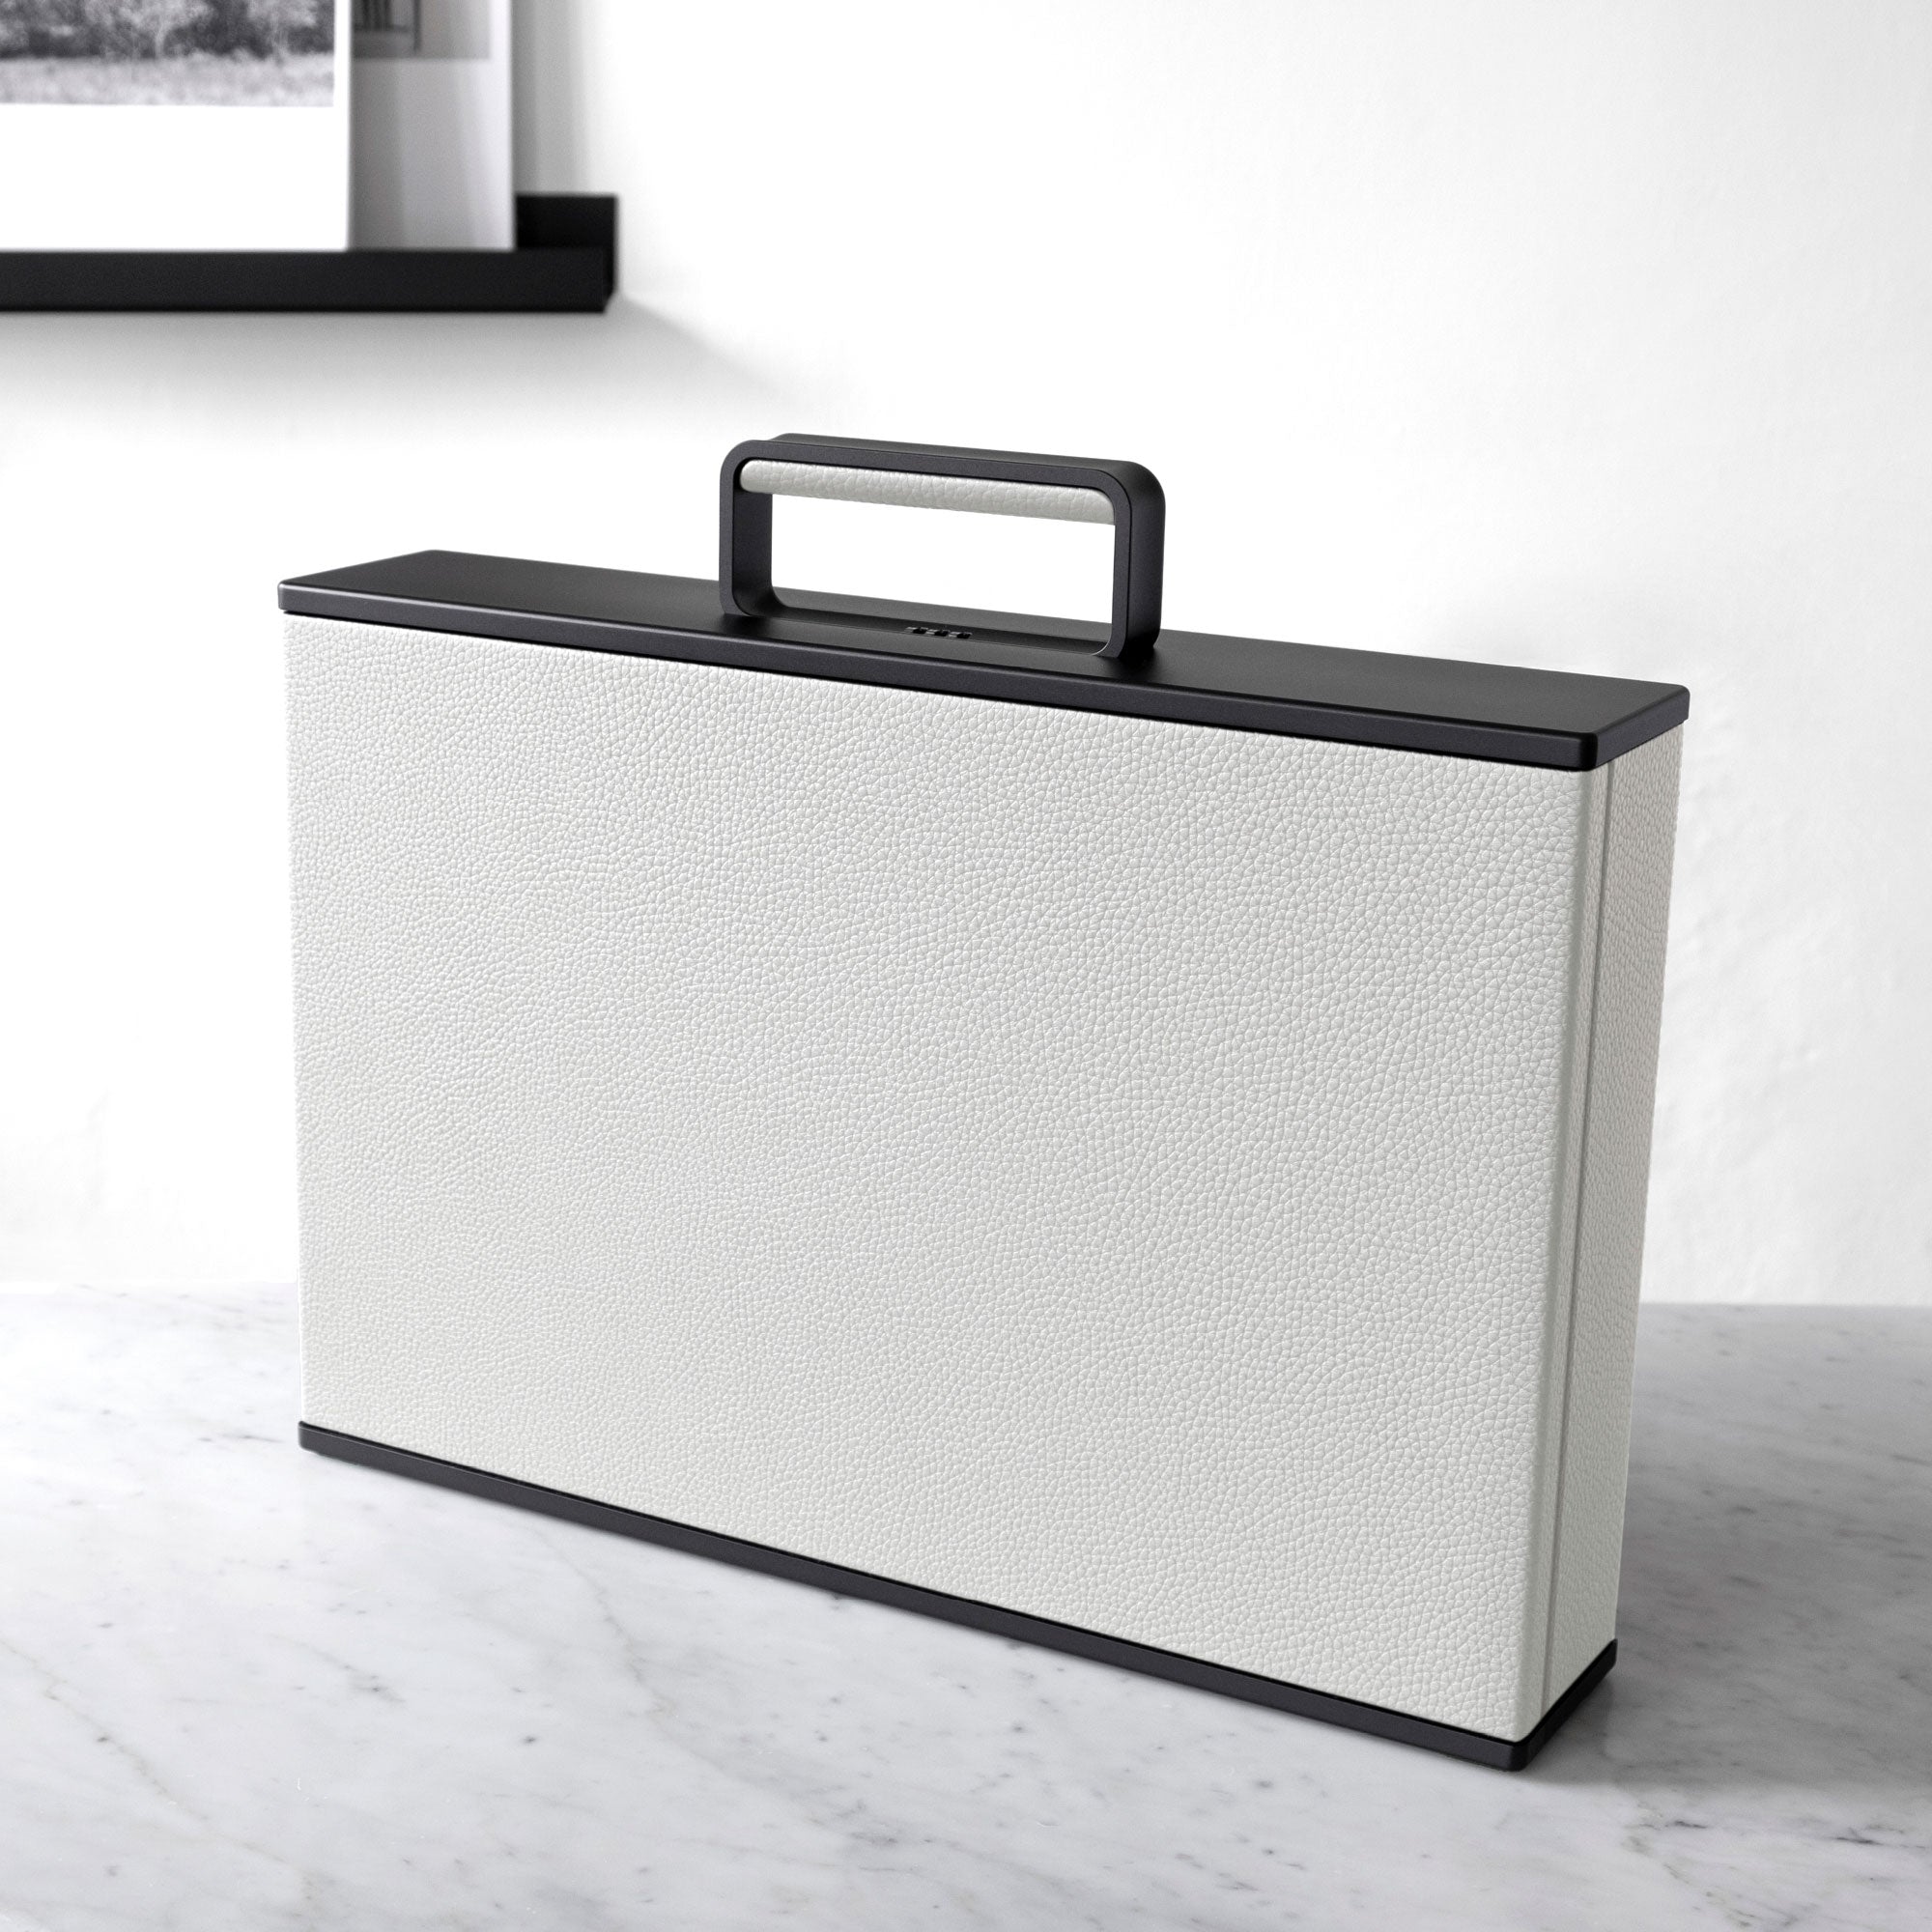 Lifestyle shot of Charles Simon Briefcases in white leather made by hand in Canada